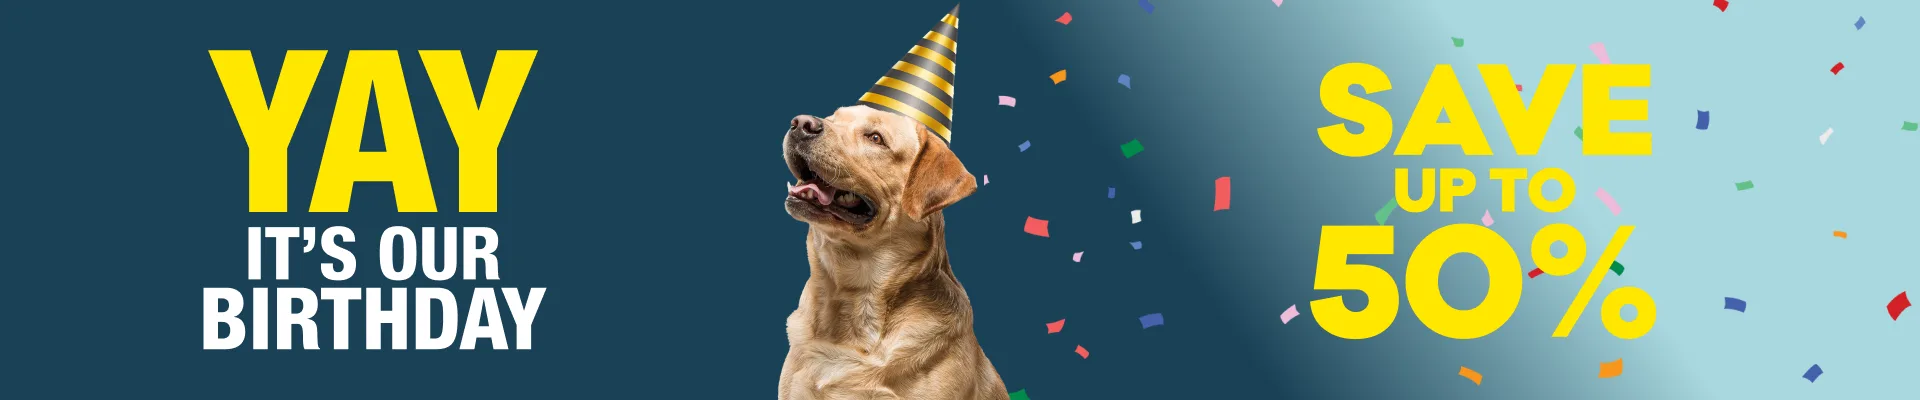 Celebrate with Petshop Science and get up to 50% OFF on big brands like Montego, Hill’s Science Plan, Bravecto and more! Enjoy amazing deals on dog and cat food, pet treats, healthcare, and grooming essentials in-store. Deals valid until 5 May 2024, 